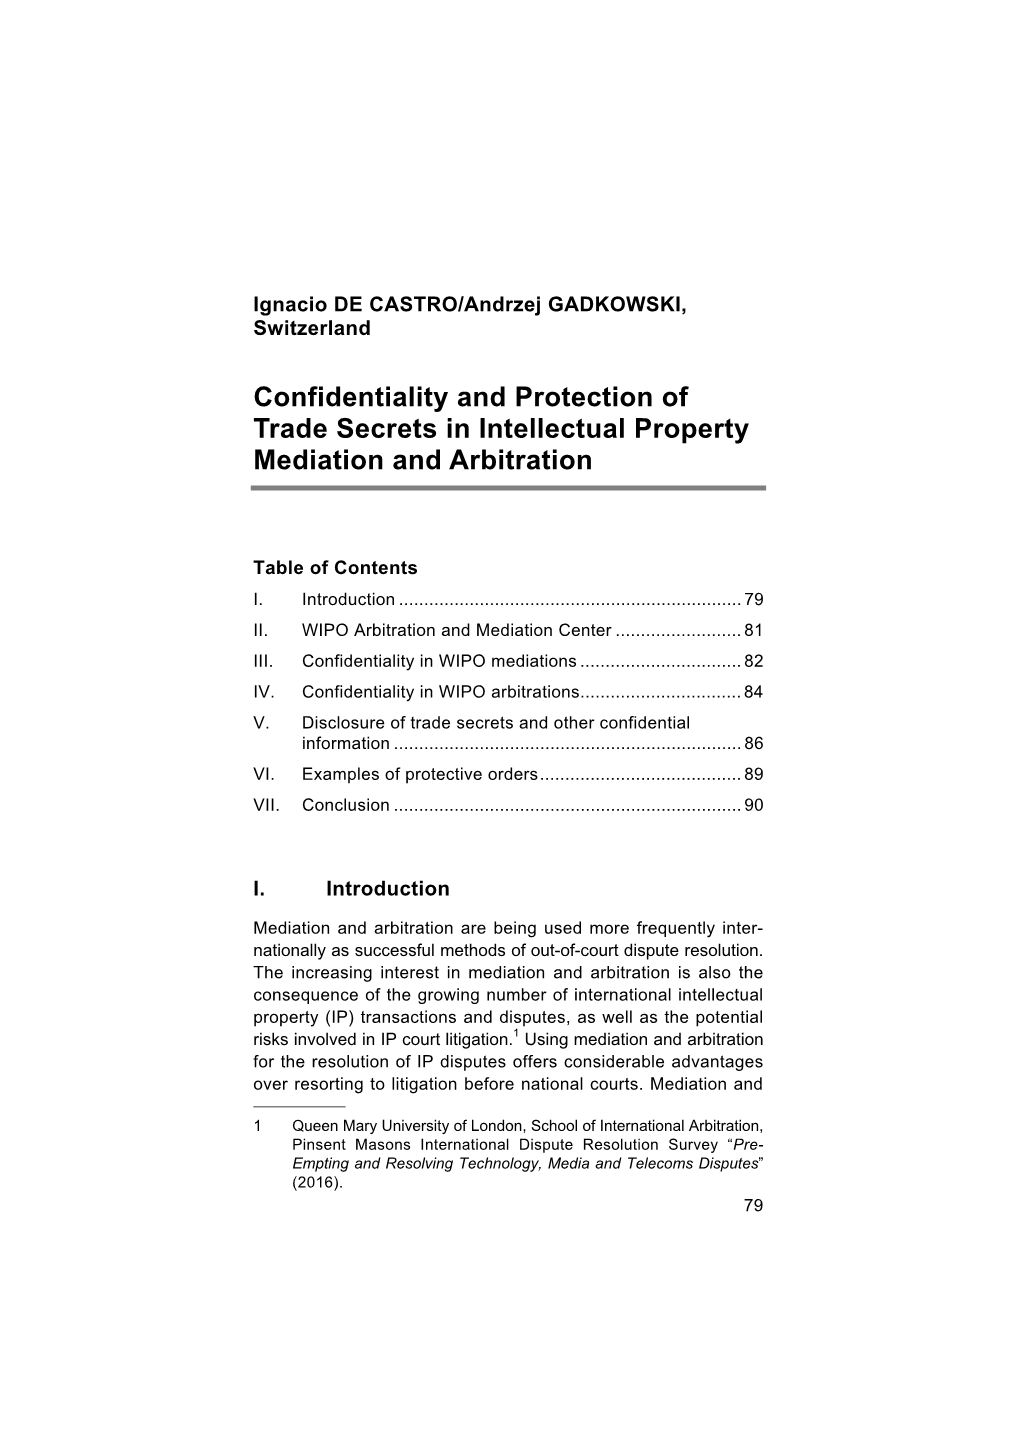 Confidentiality and Protection of Trade Secrets in Intellectual Property Mediation and Arbitration